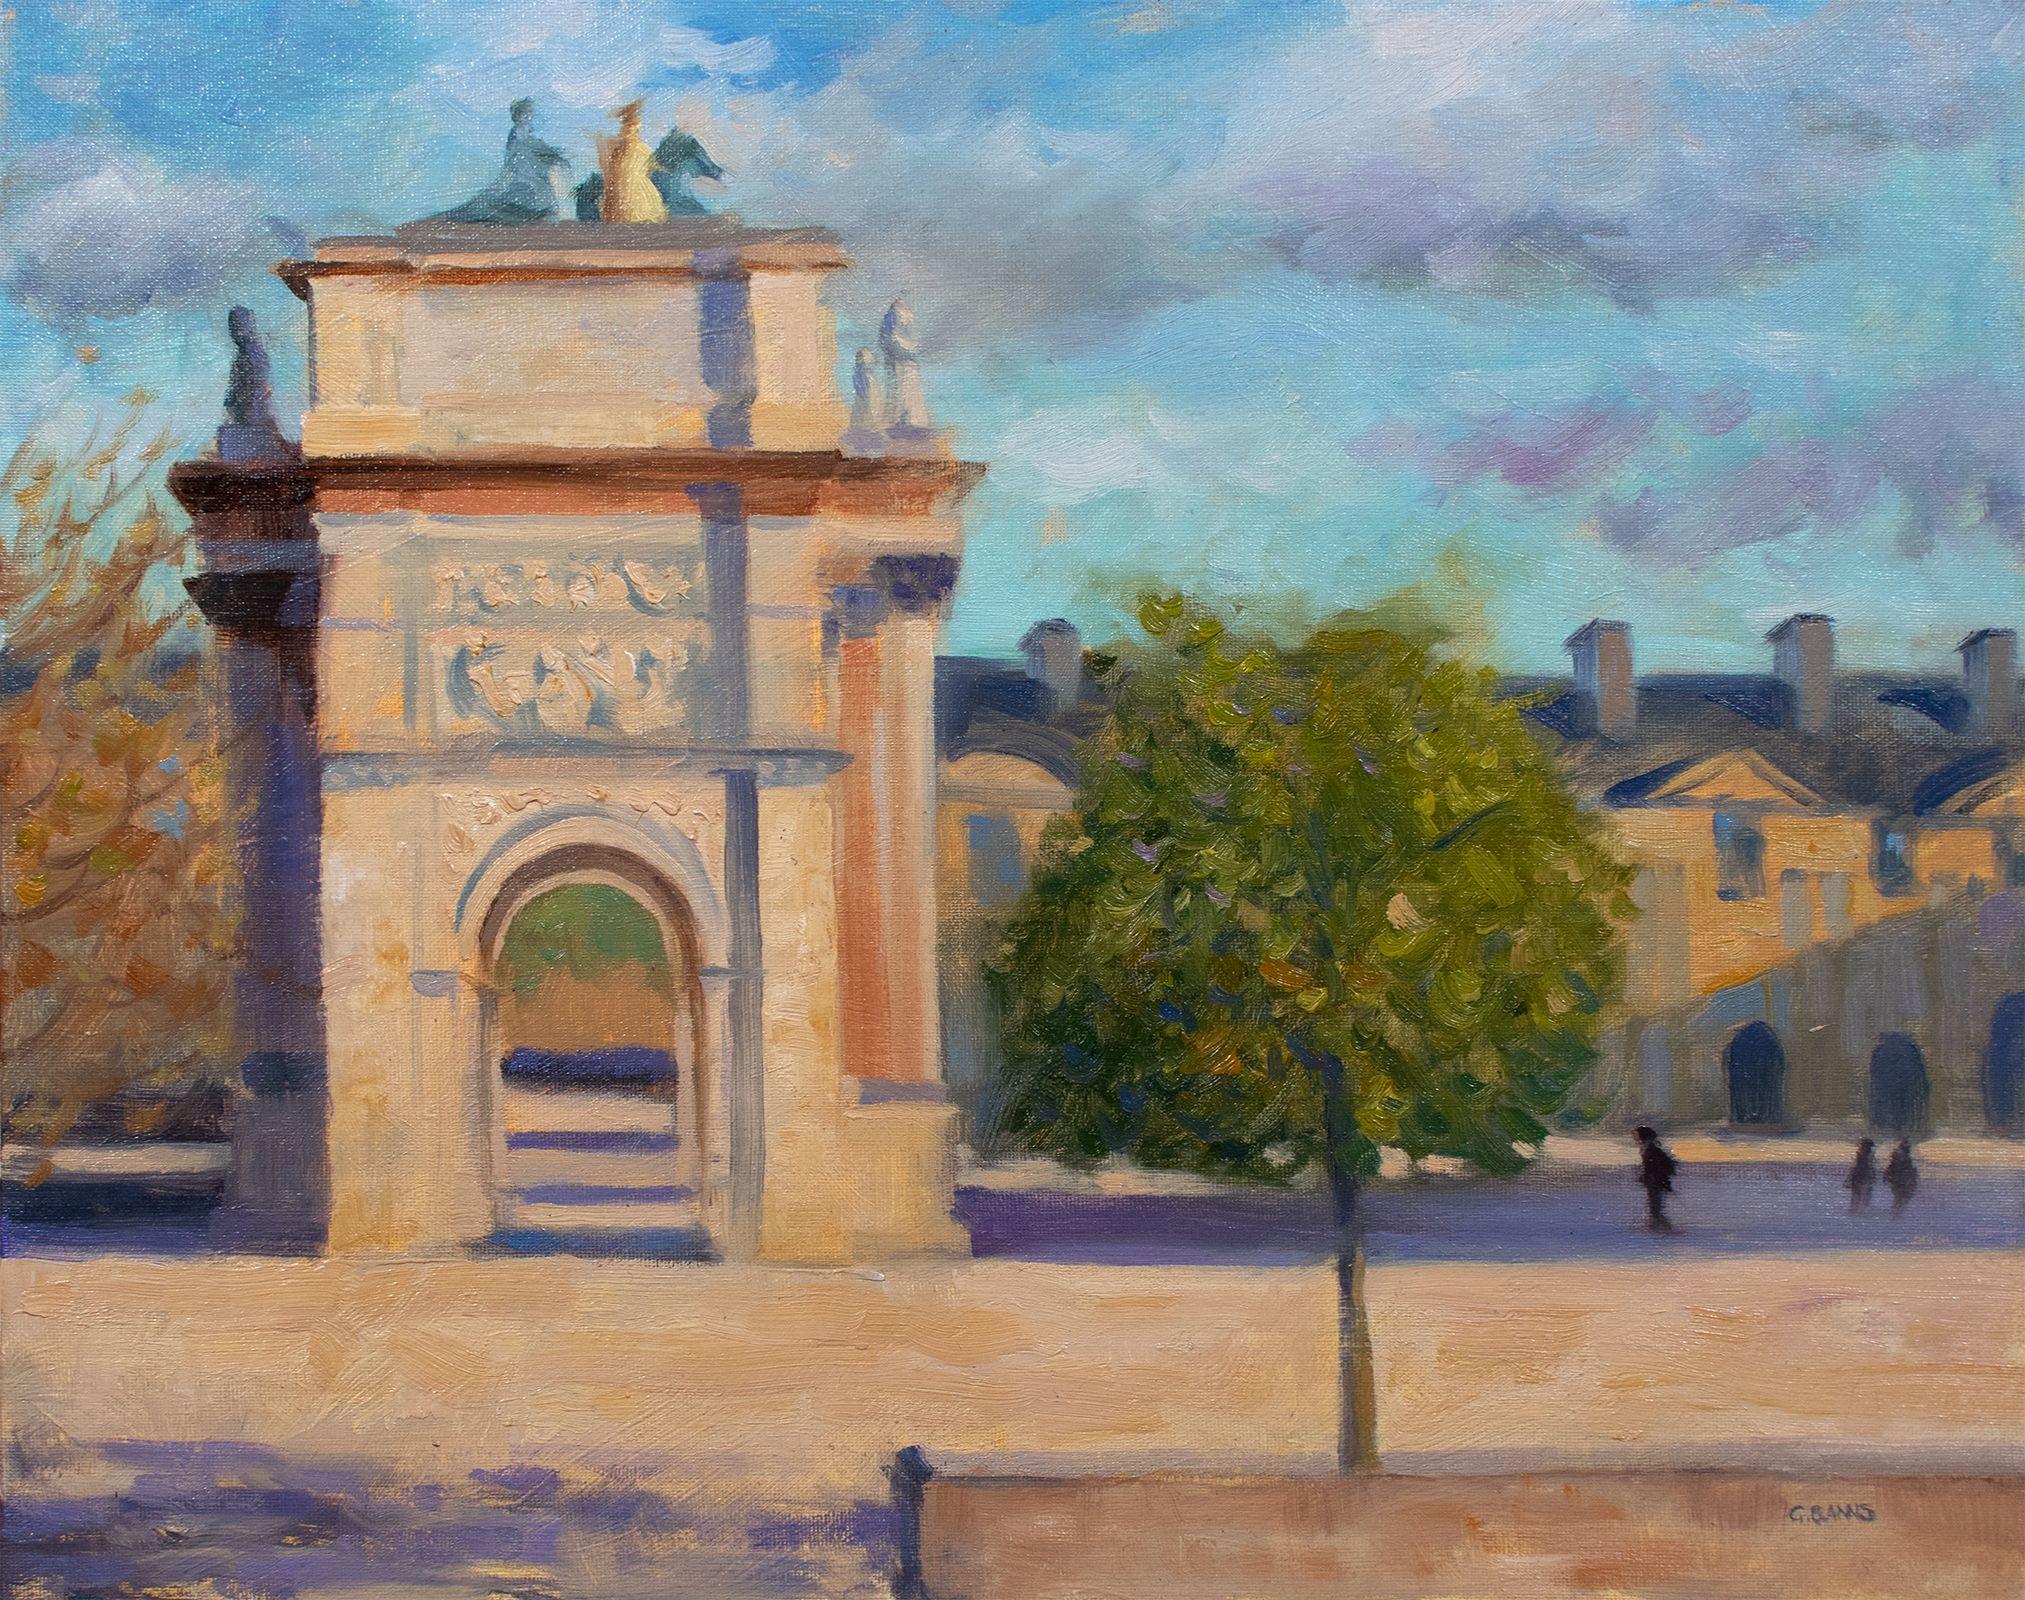 The Arc de Triomphe du Carrousel was commissioned by Napoleon Bonaparte I, and can be found between The Louvre museum and the Tuileries Garden.  It sat as a gateway to the Tuileries Palace before the palace was destroyed by a fire (started by